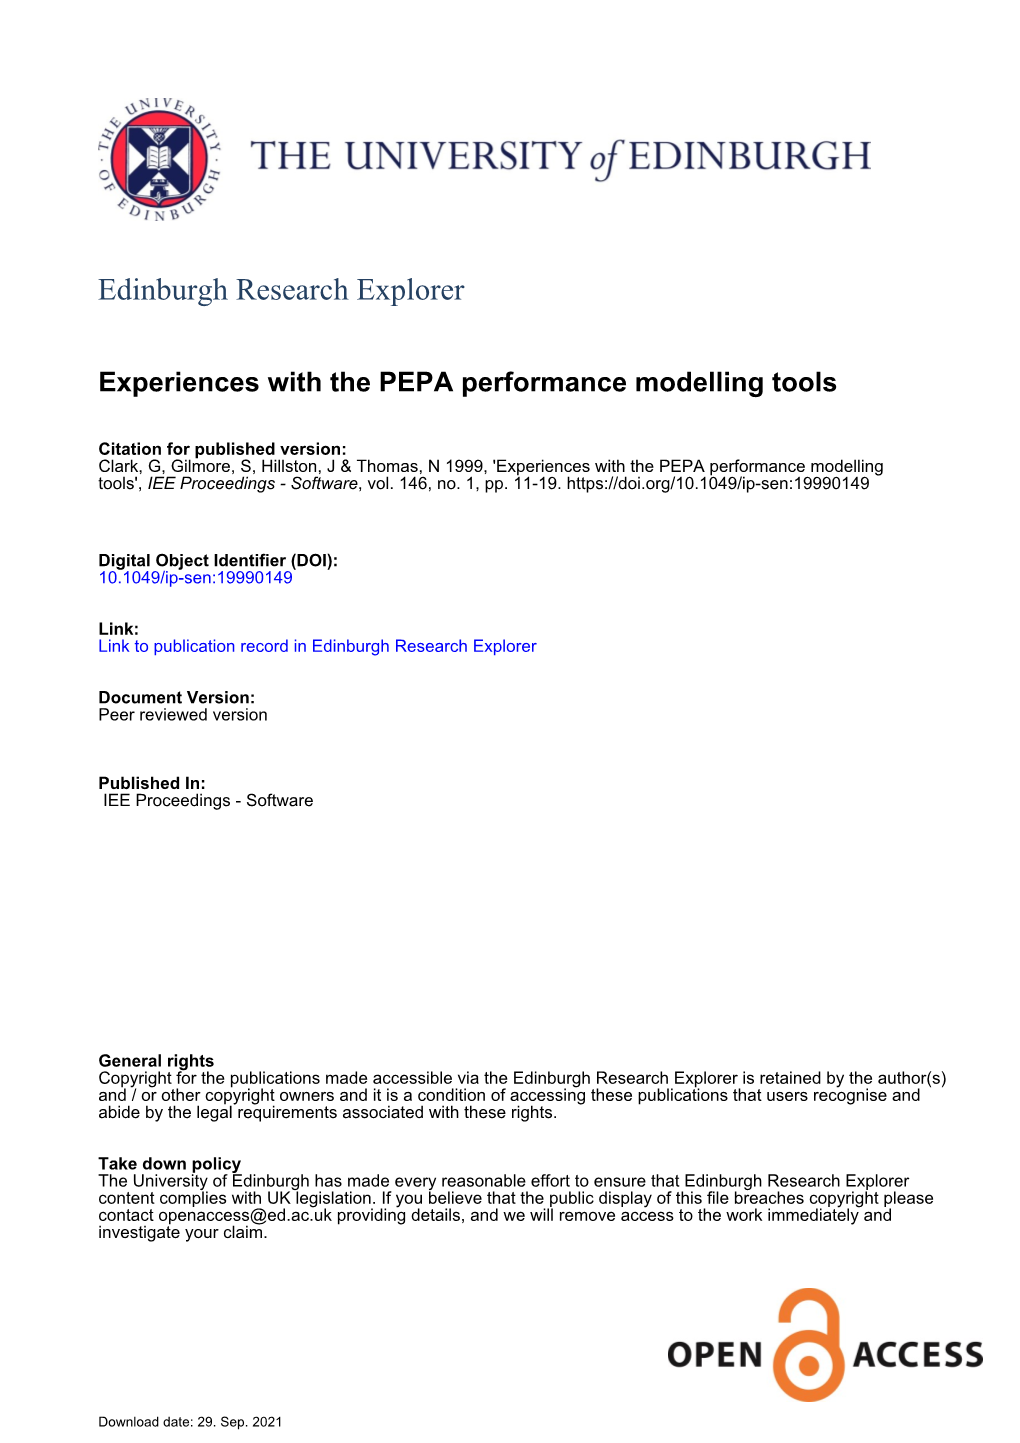 Experiences with the PEPA Performance Modelling Tools